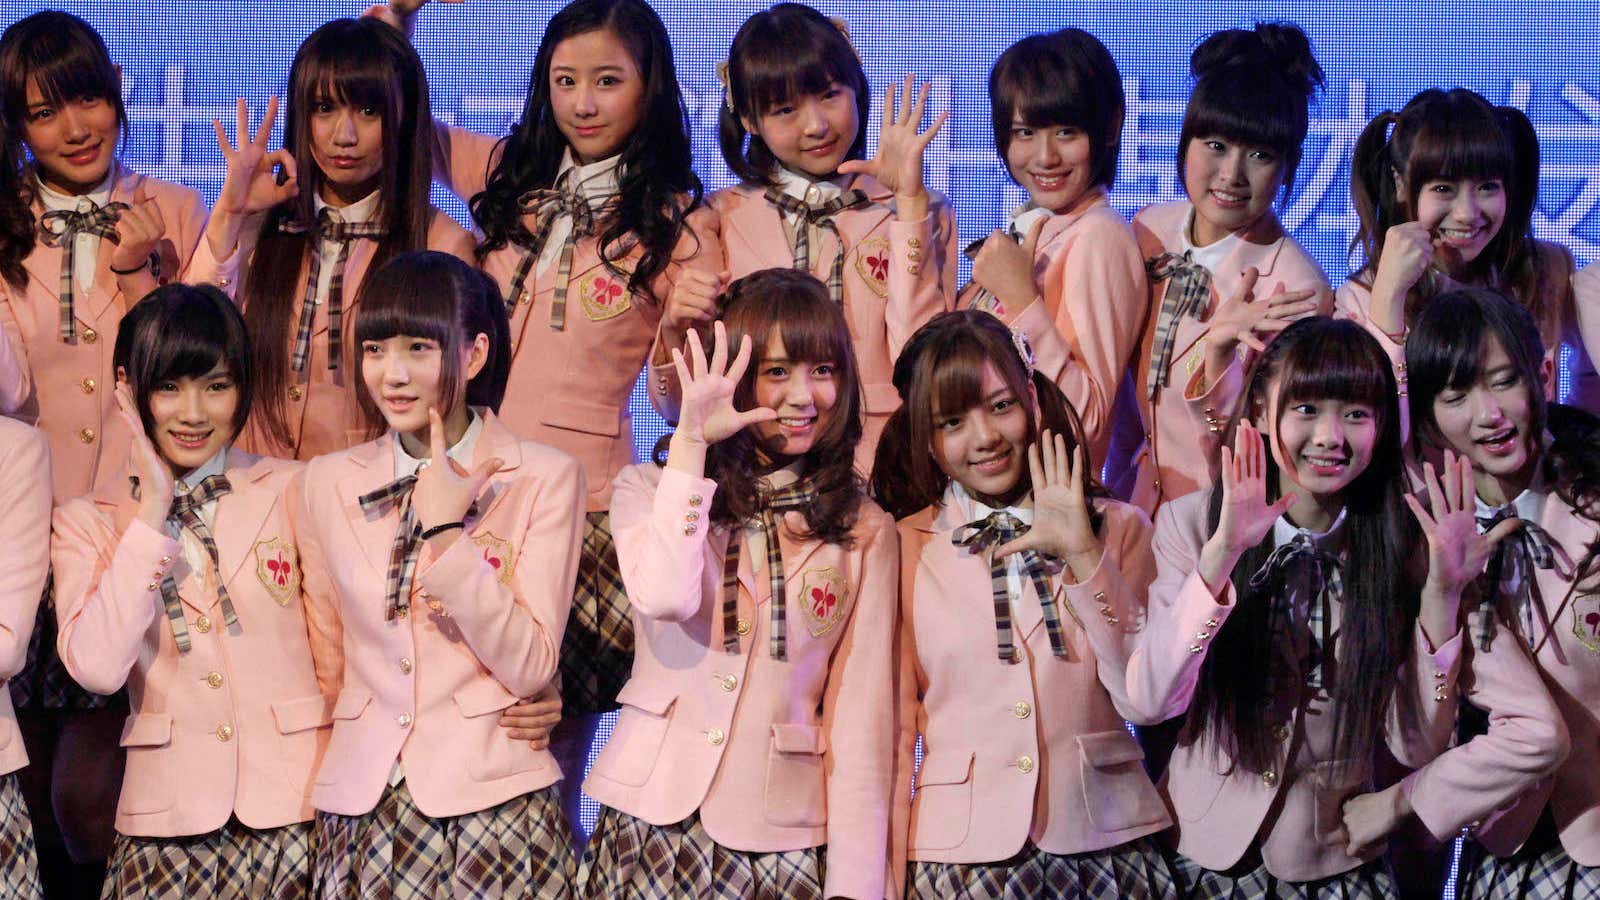 SNH48: China is fighting K-pop with a girl band funded by VC investors